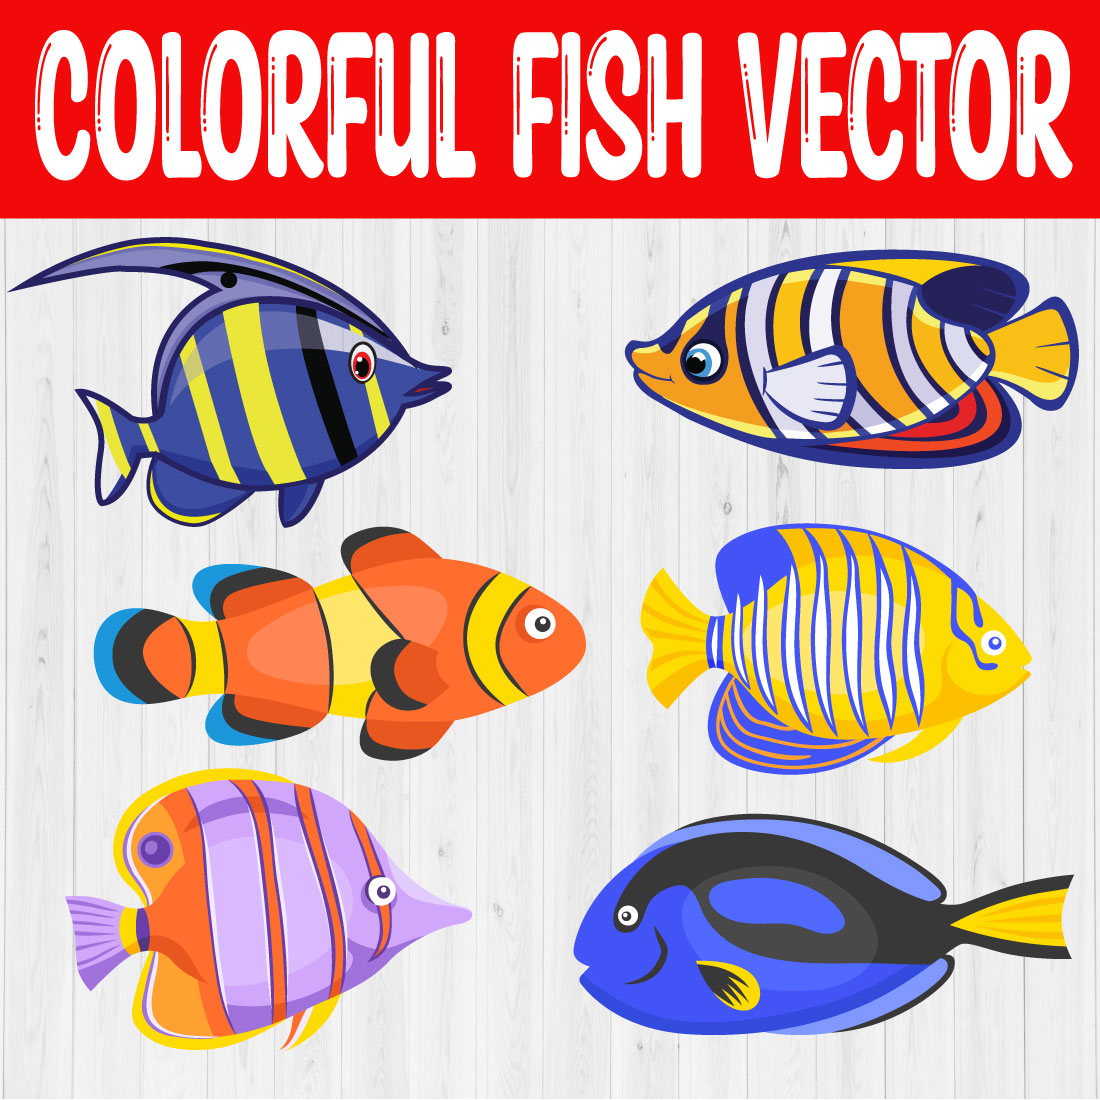 Colorful Fish Vector vol1 cover image.